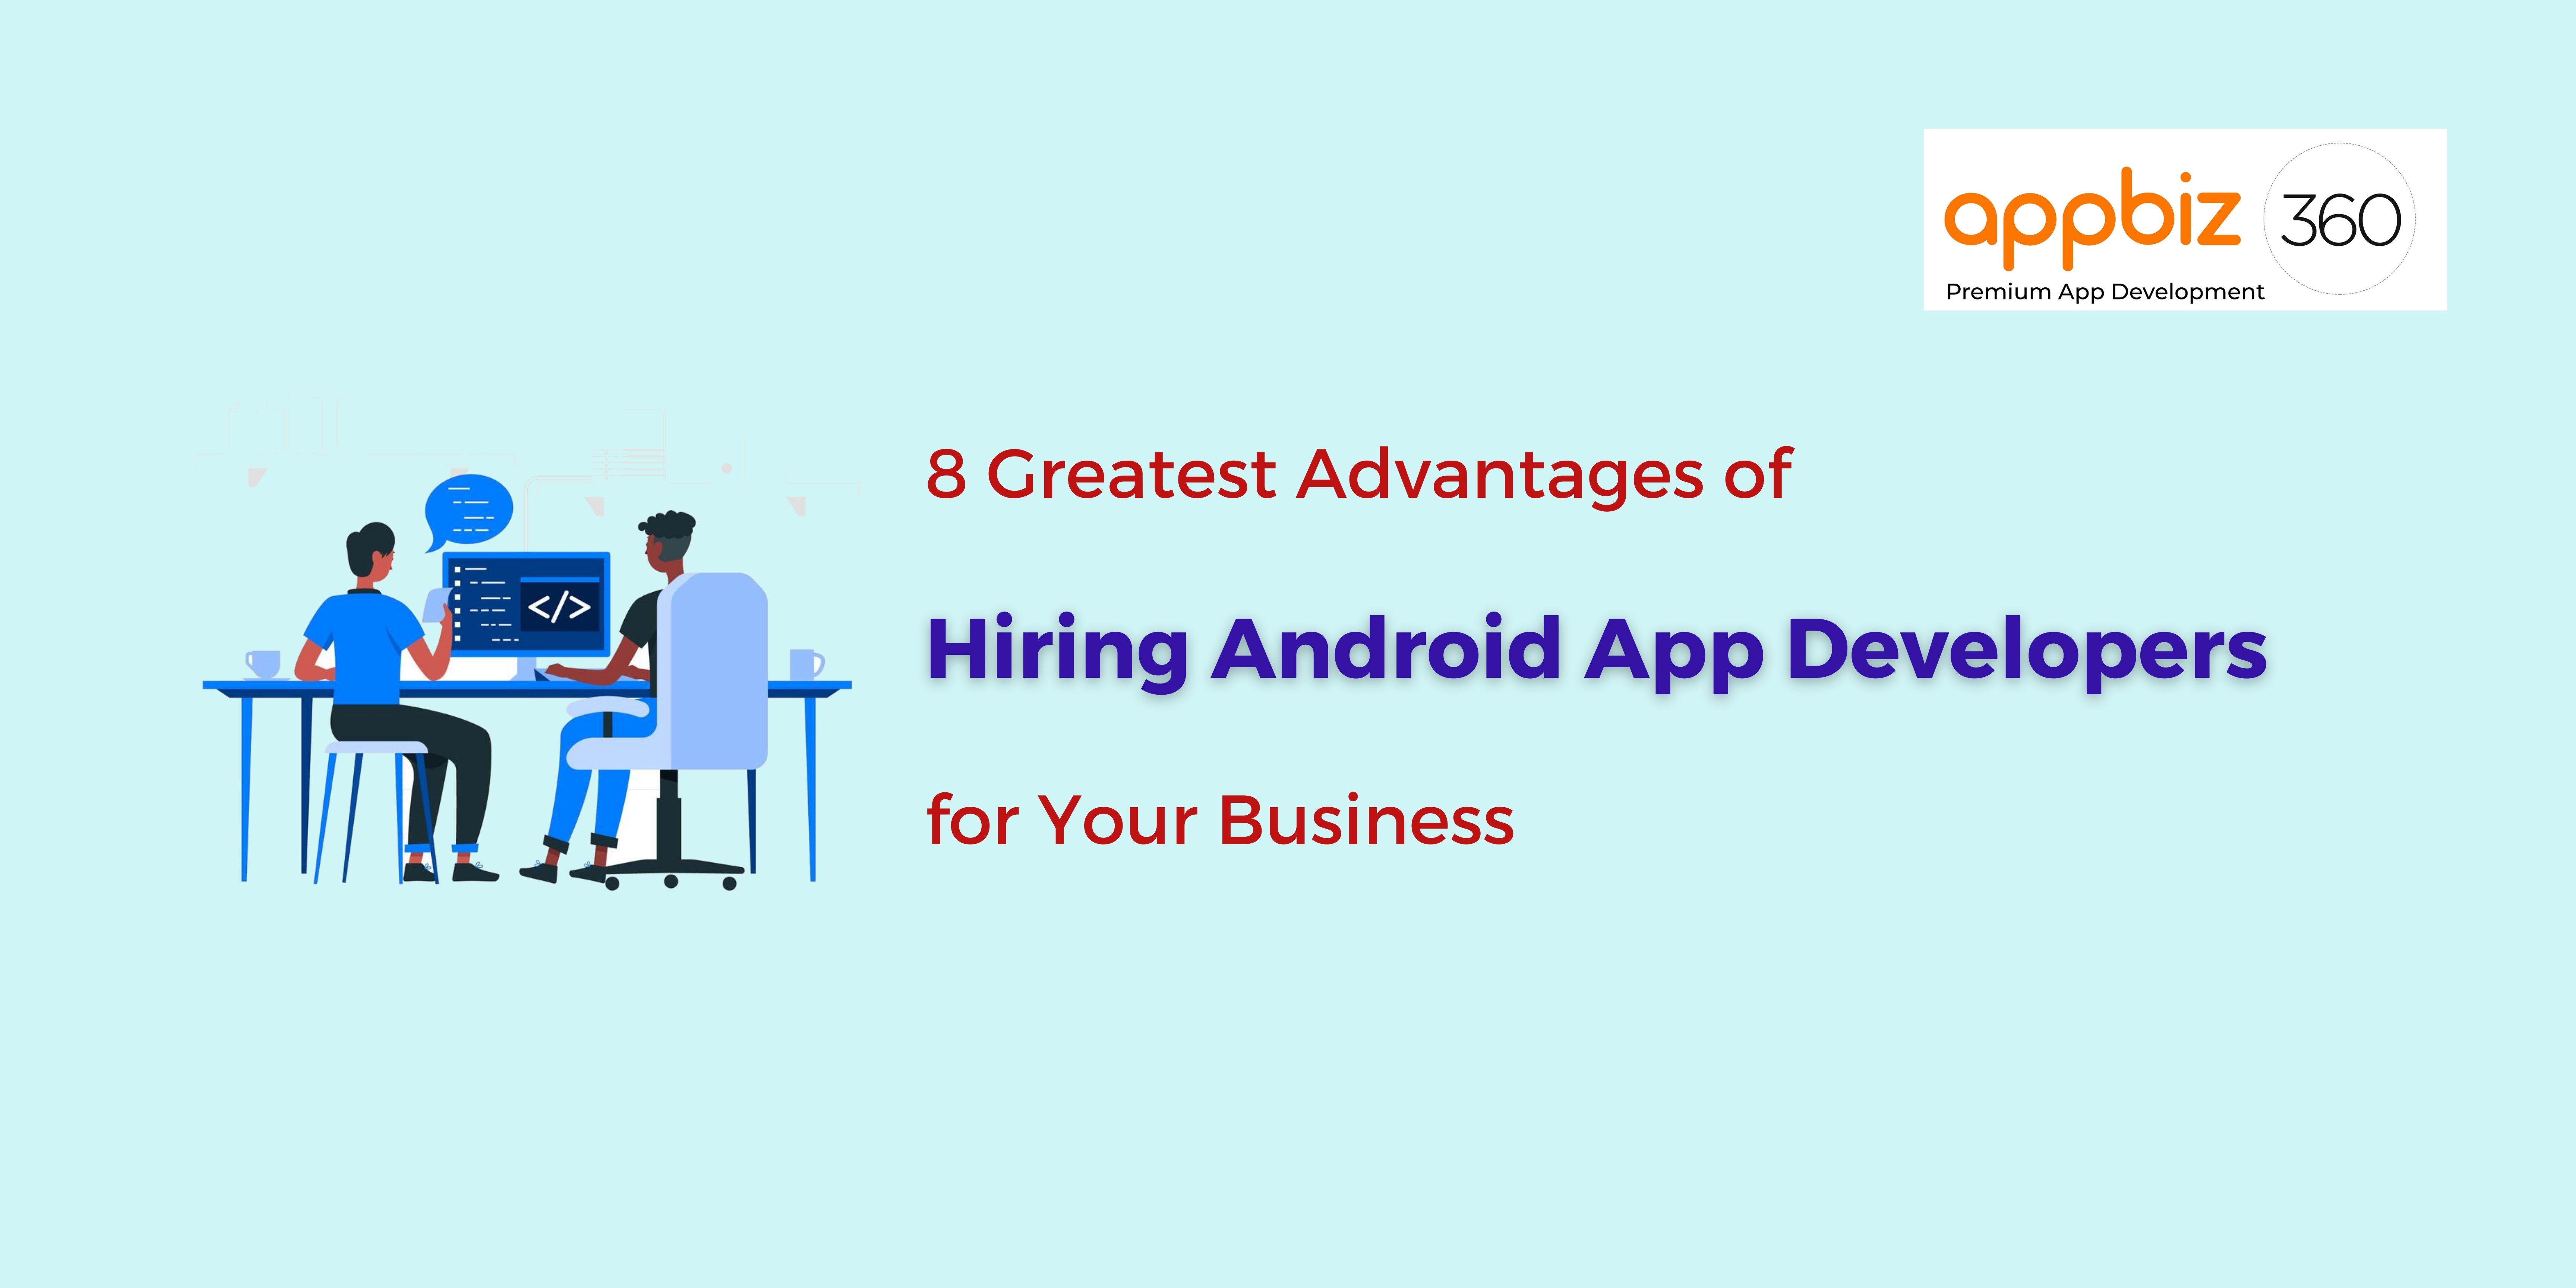 8 Greatest Advantages of Hiring Android App Developers for Your Business